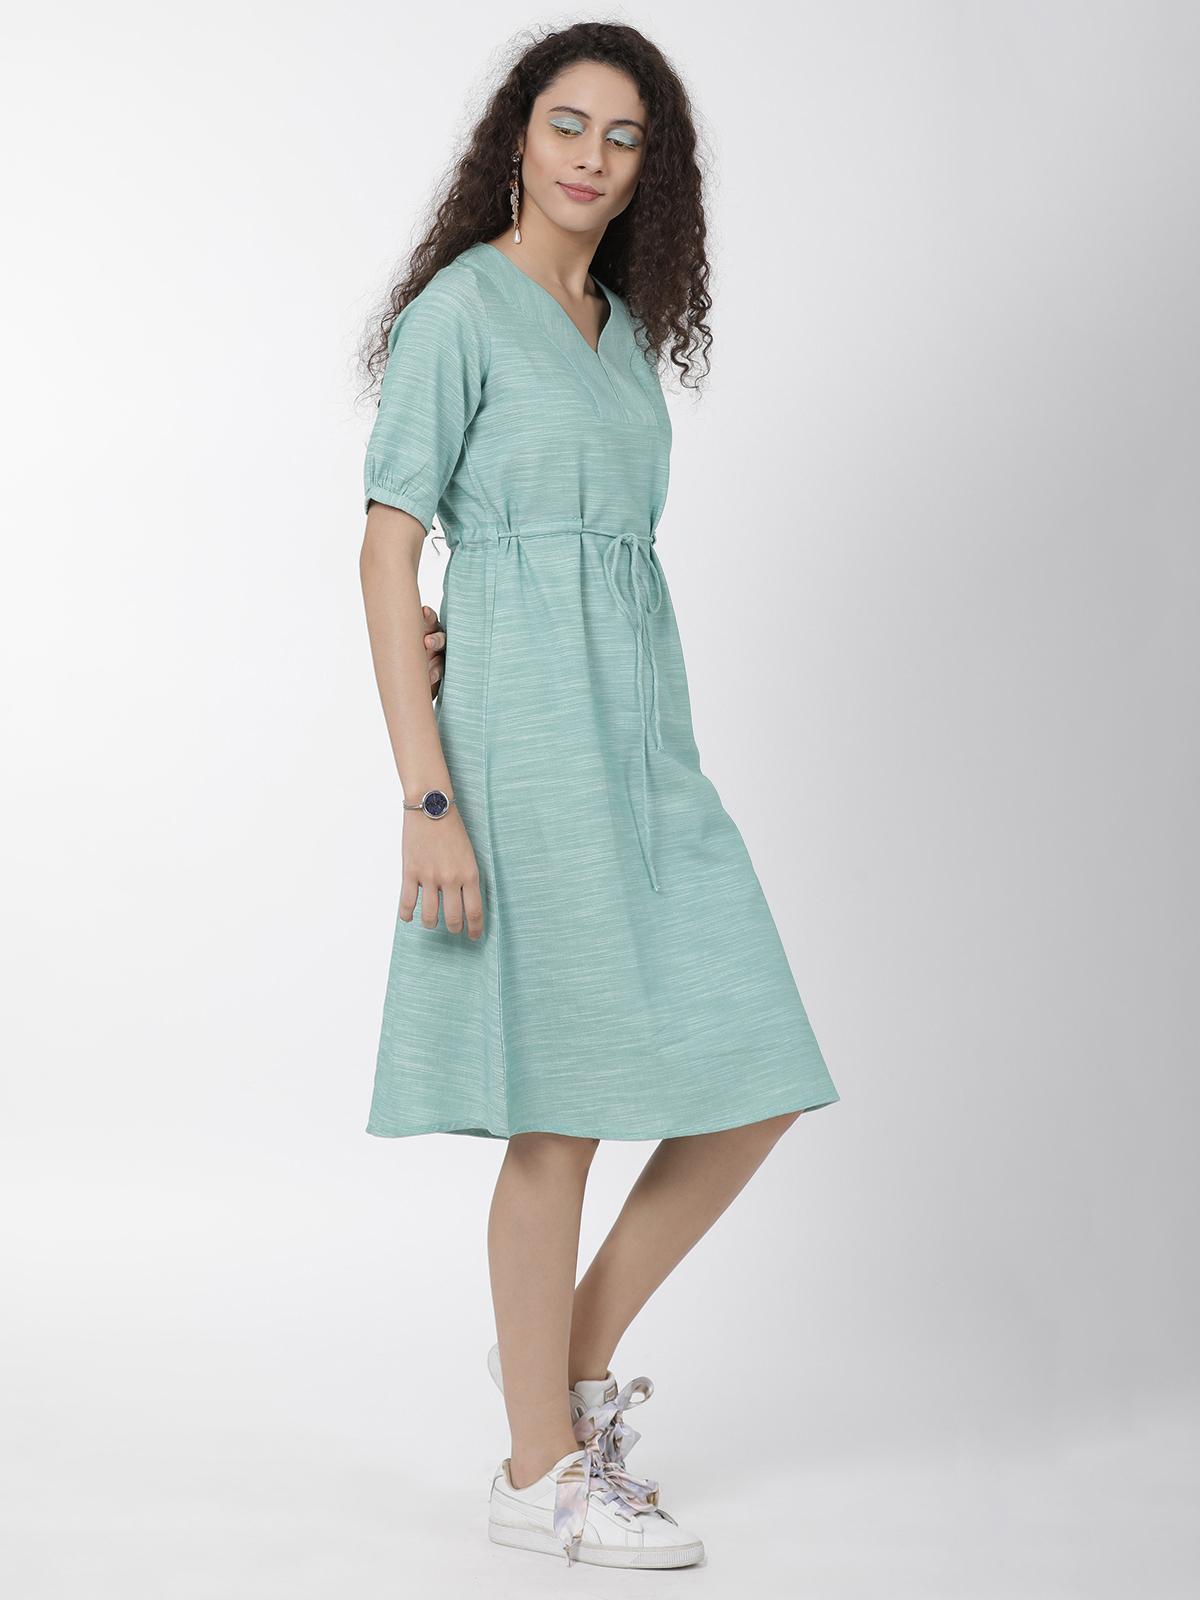 Solid Sea Green Cotton Linen 3/4th Sleeve One Piece Dress